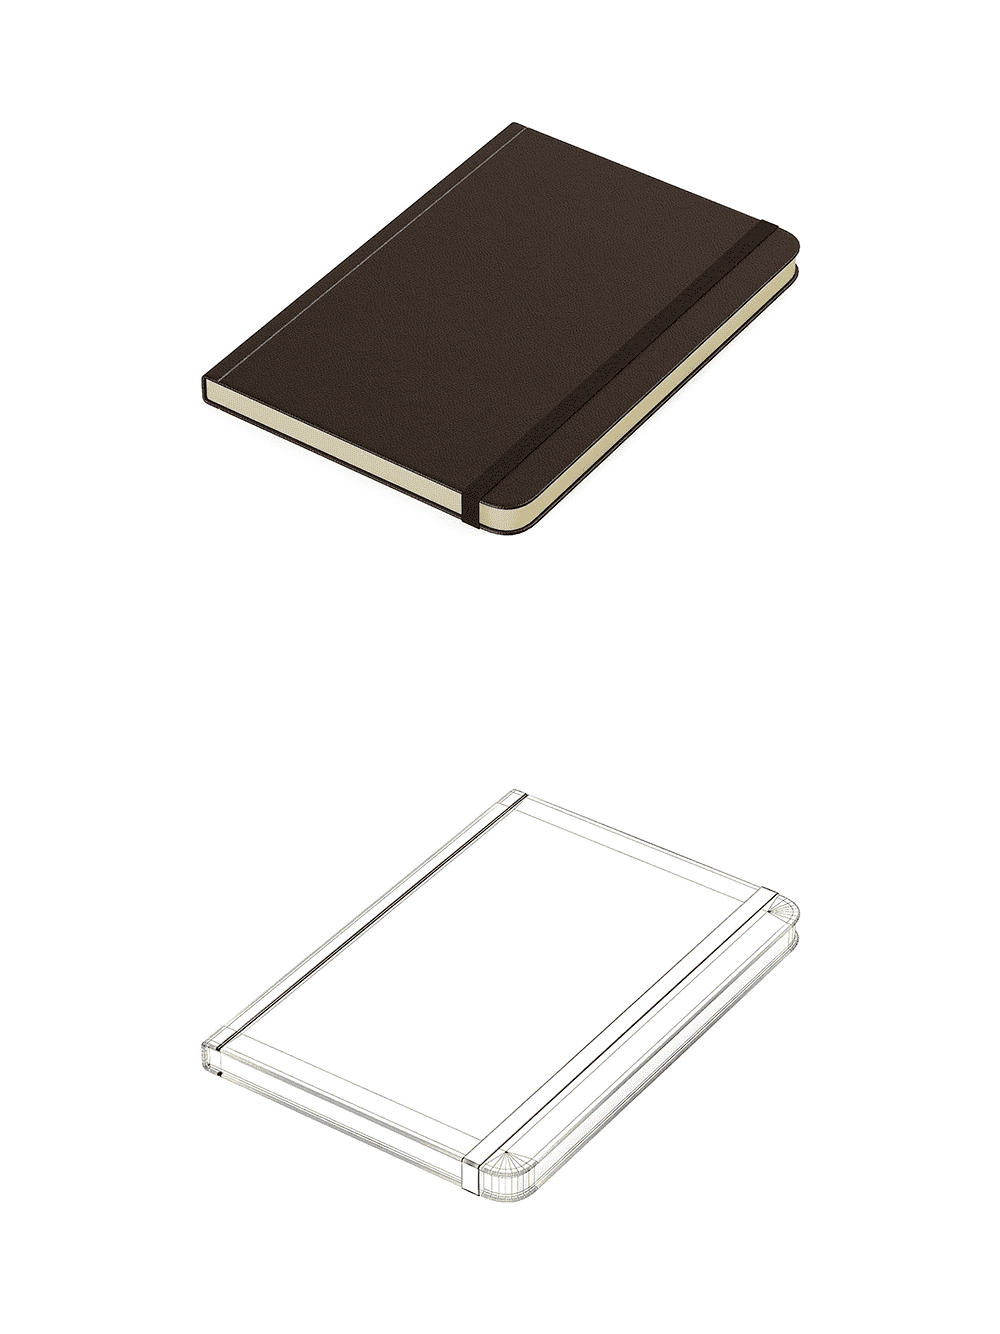 Brown notebook, picture for pinterest.